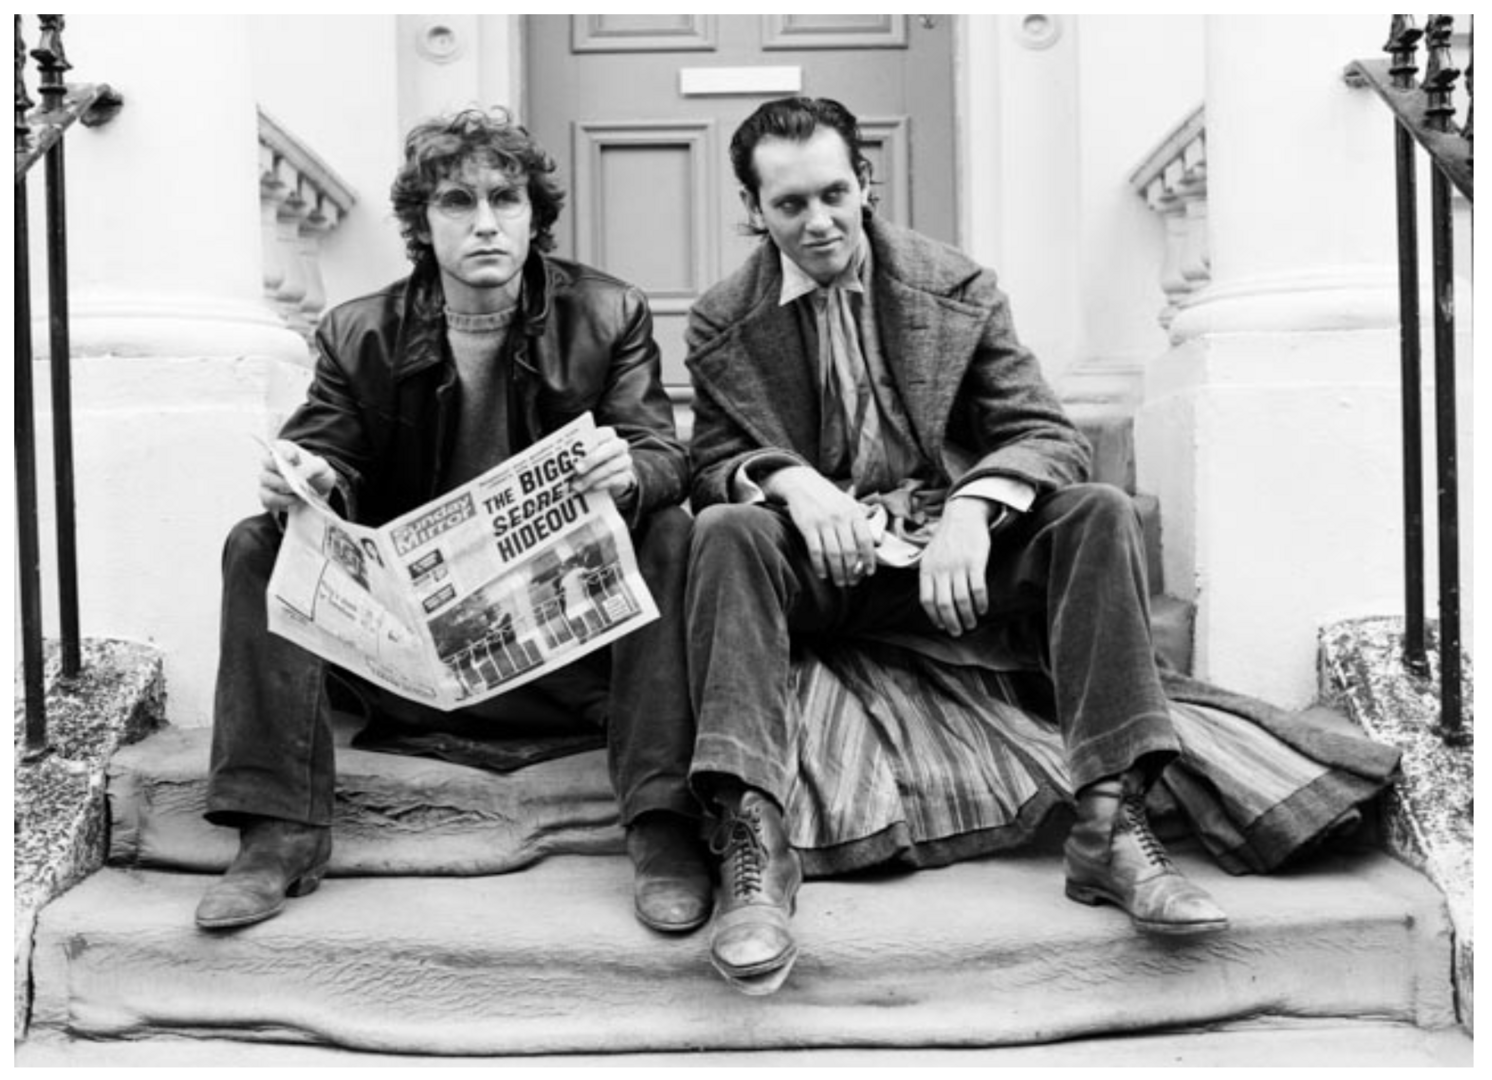 Film still from Withnail and I featuring Richard E Grant and Paul McGann sitting on steps in London,© Murray Close